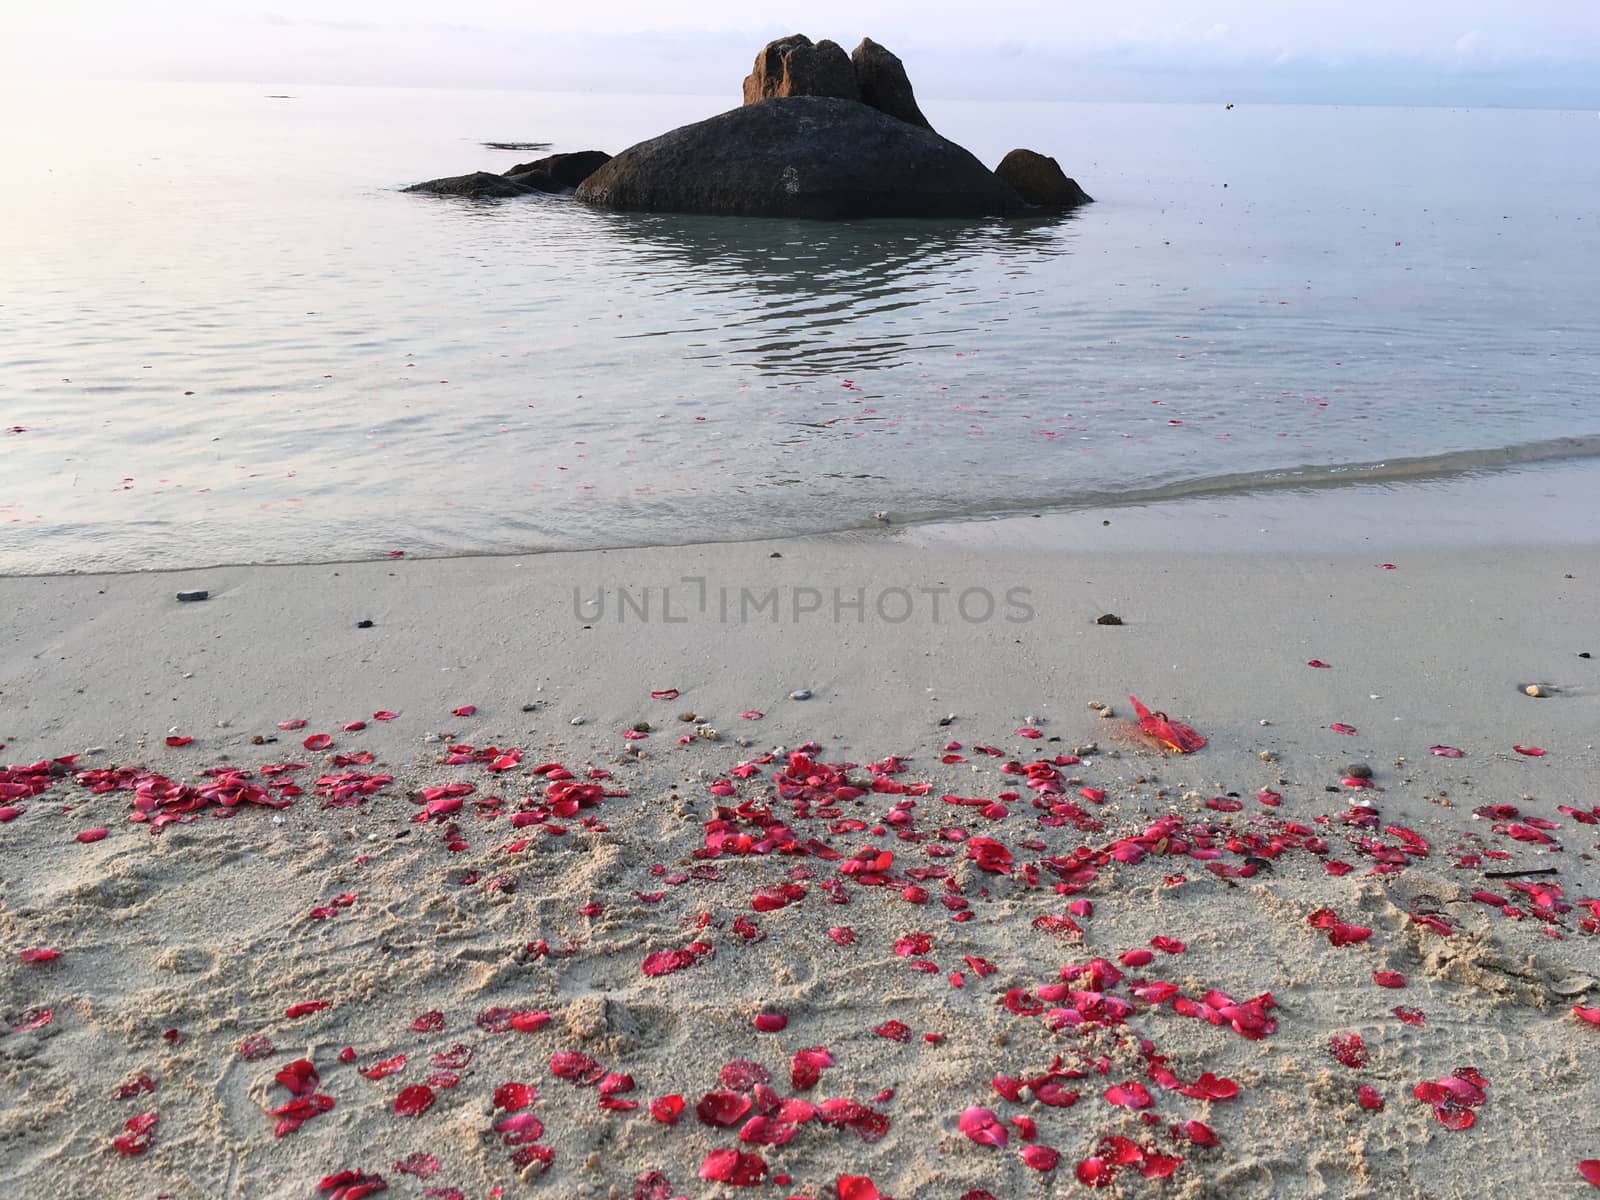 Roses Petals on the sandy beach early morning.